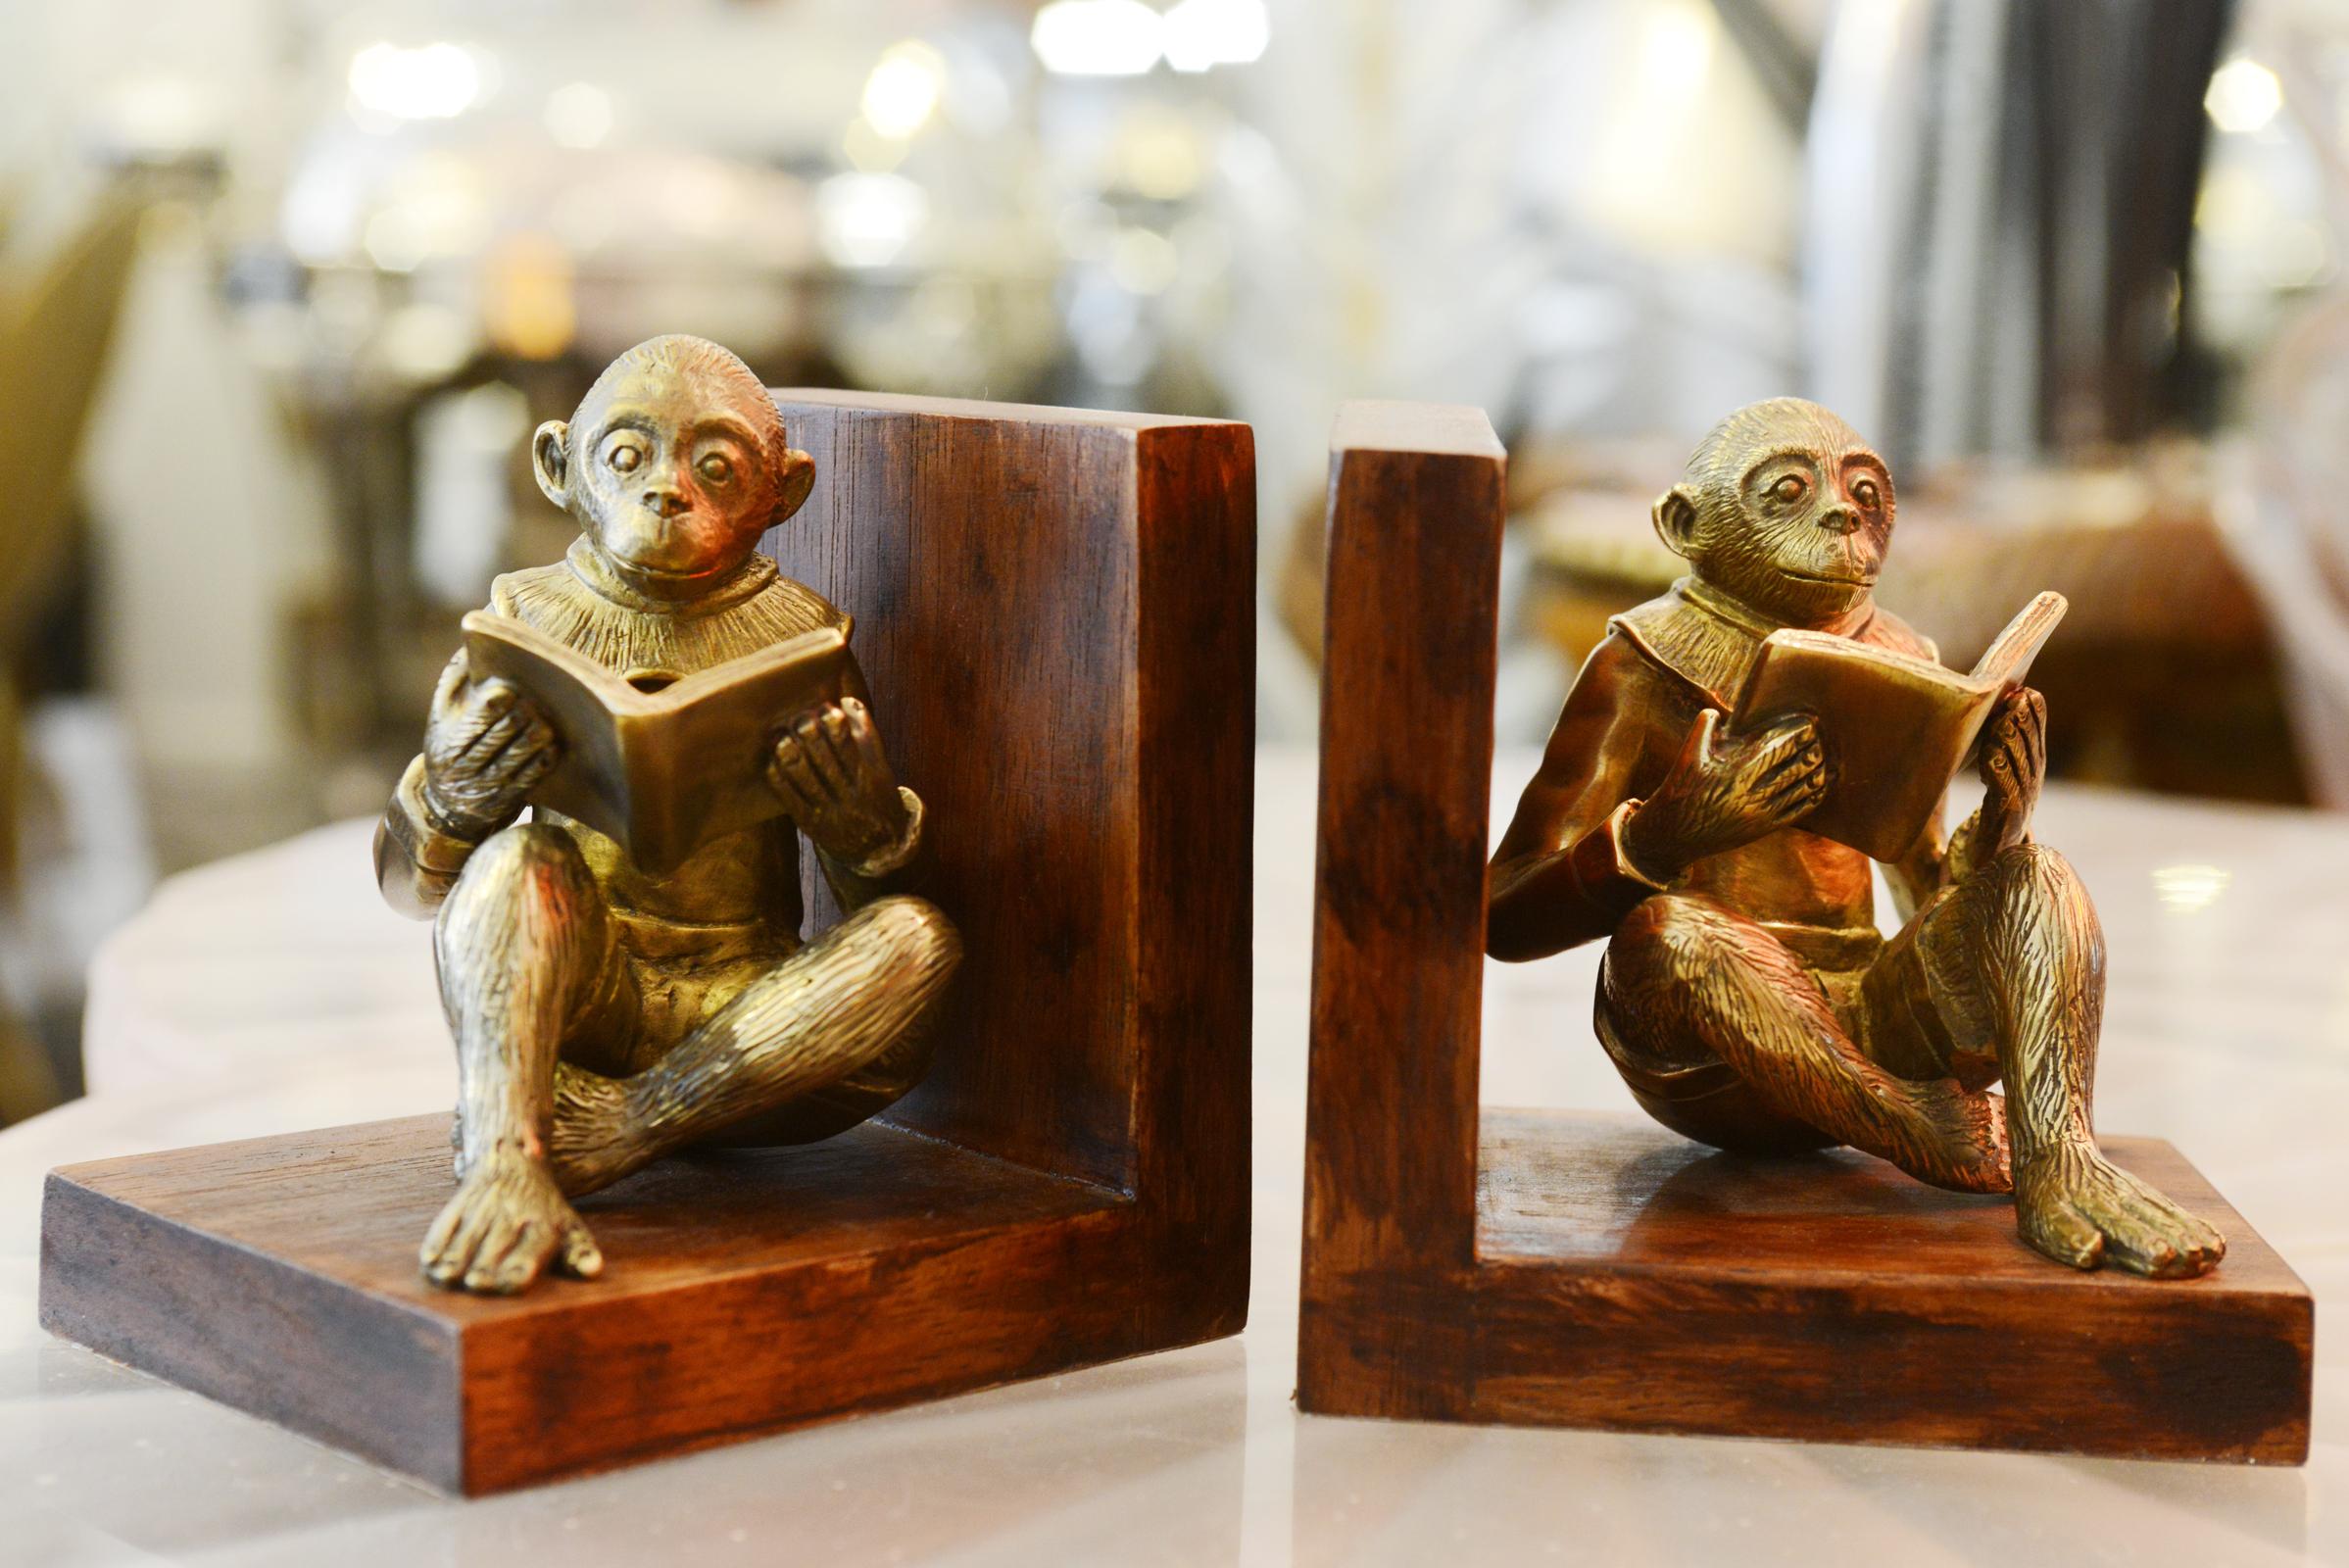 Bookends set of 2 Monkeys readers
in casted bronze. On noble wooden base.
Each piece is: L 12.7 x 10 x H 12.5cm.